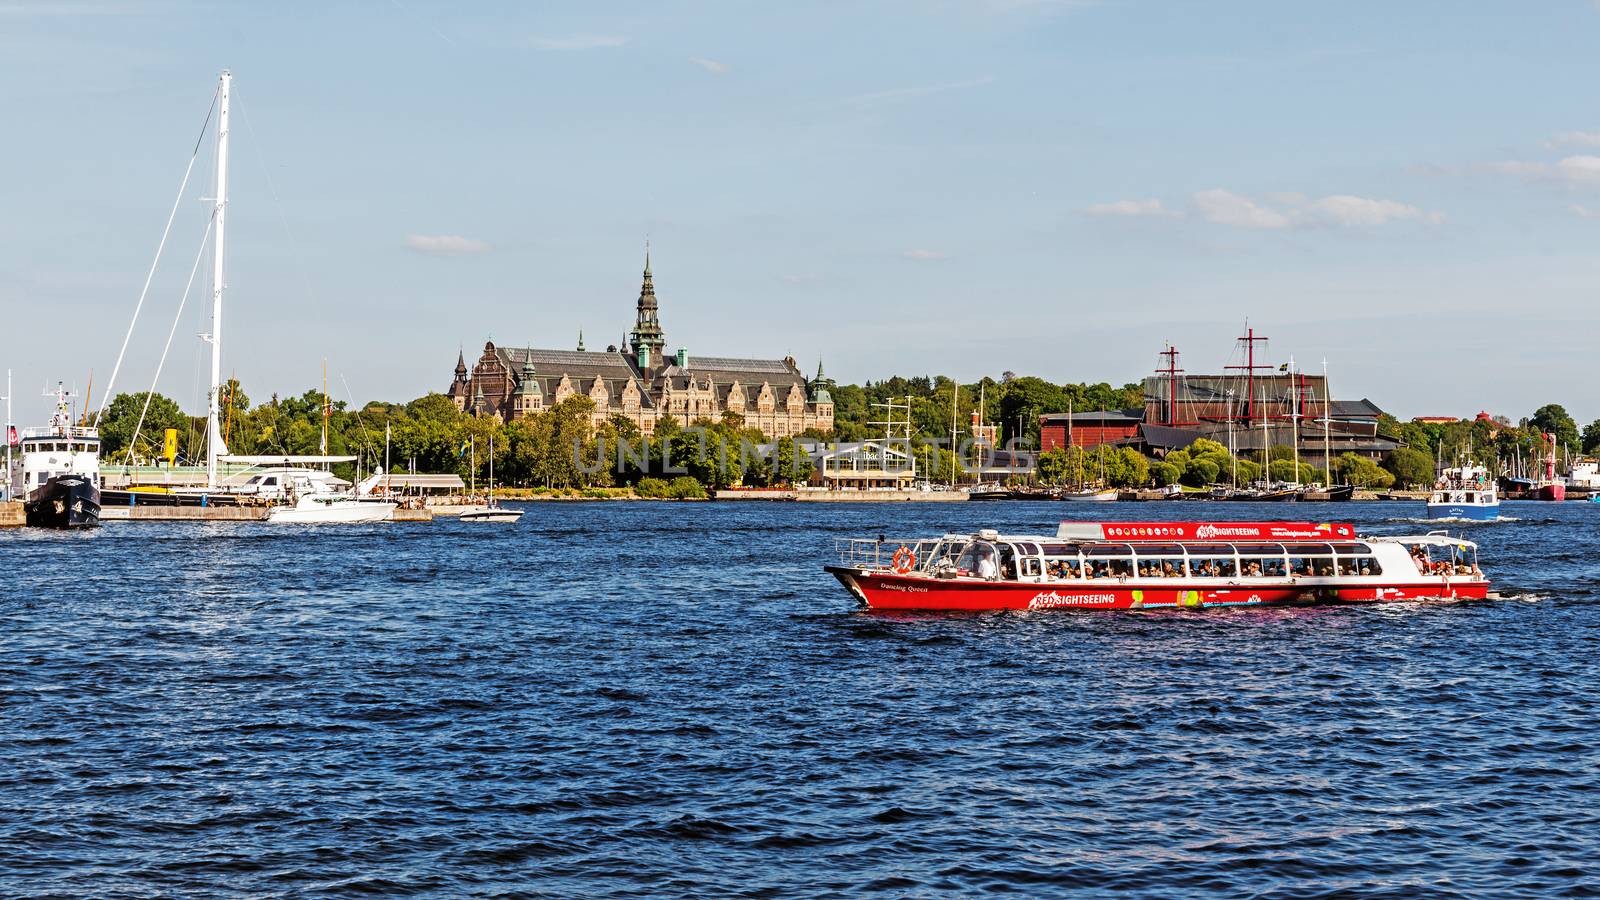 The Nordic and Vasa Museums on Djurgarden Island in Stockholm. The Island is home to historical buildings, monuments, galleries, the amusement park Grona Lund and the open-air Skansen.